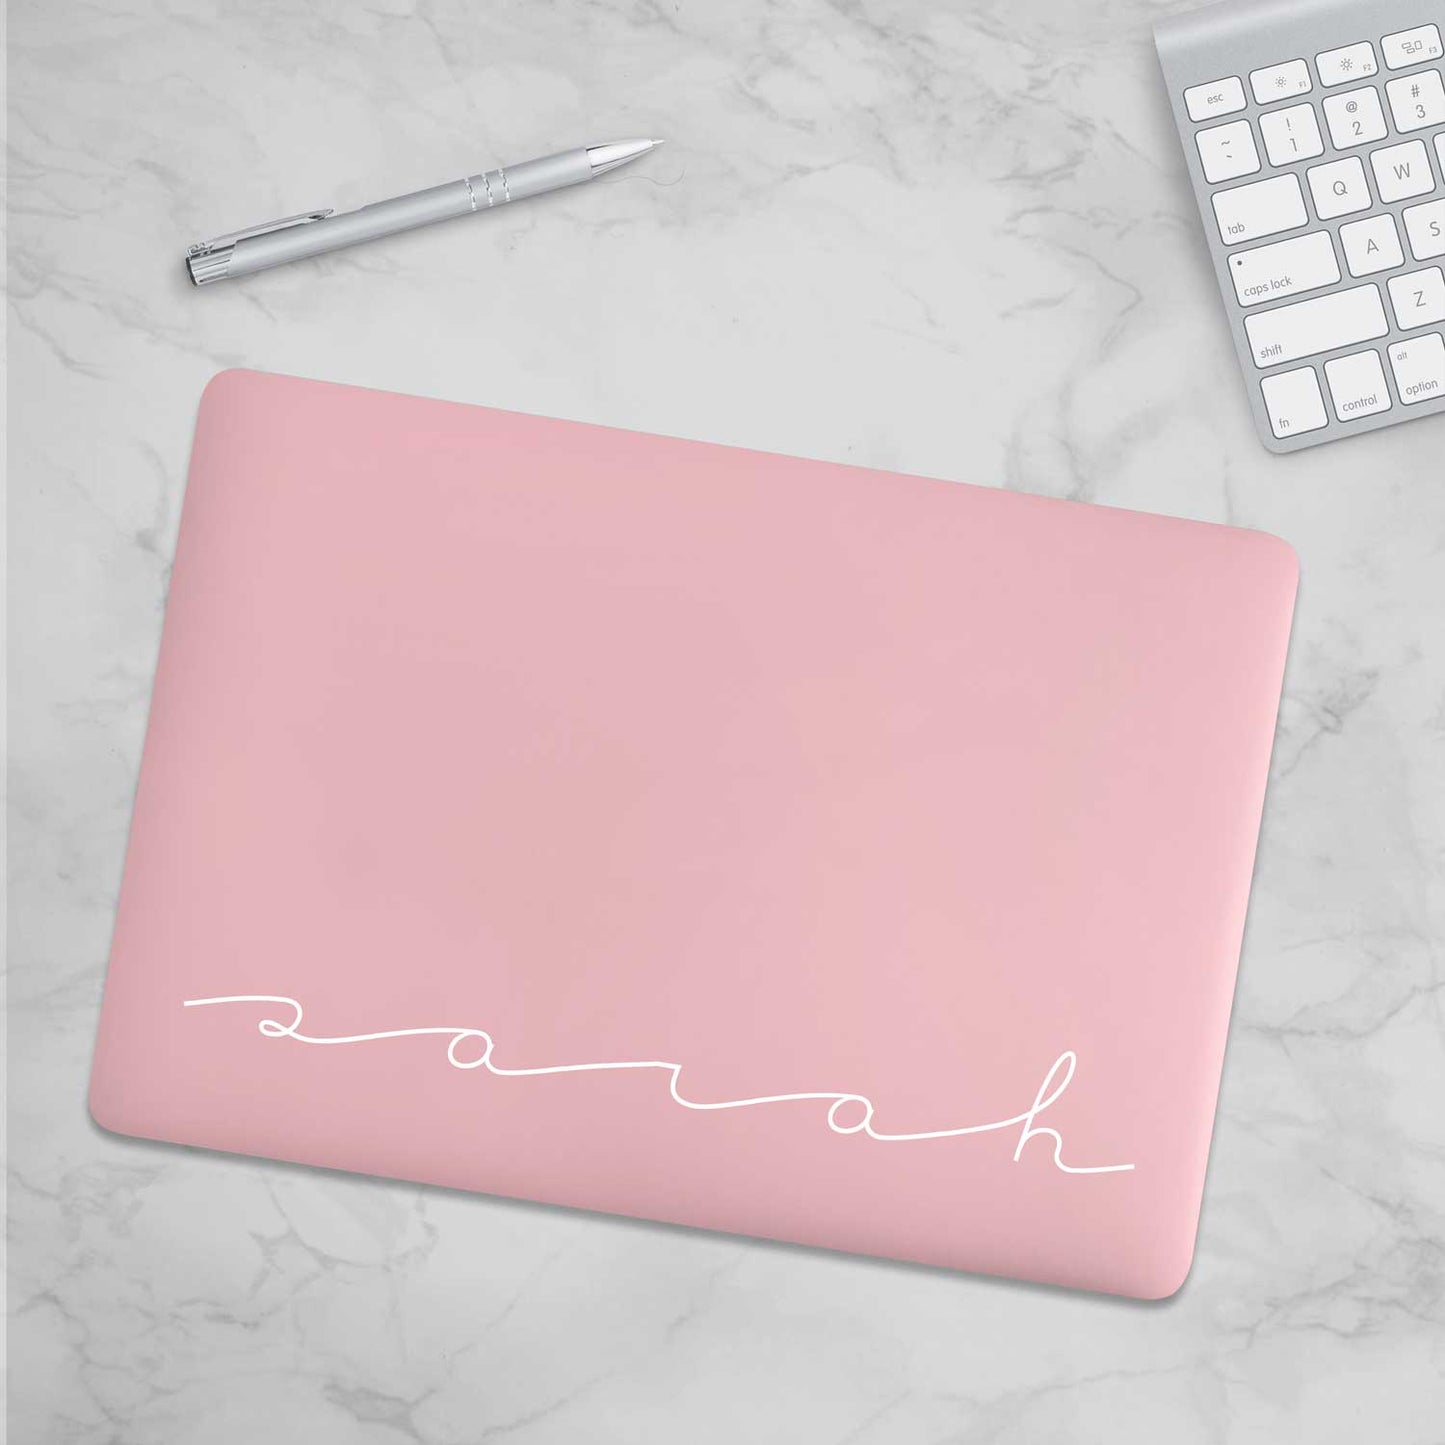 Load image into Gallery viewer, Personalized Macbook Hard Shell Case - Blush Pink
